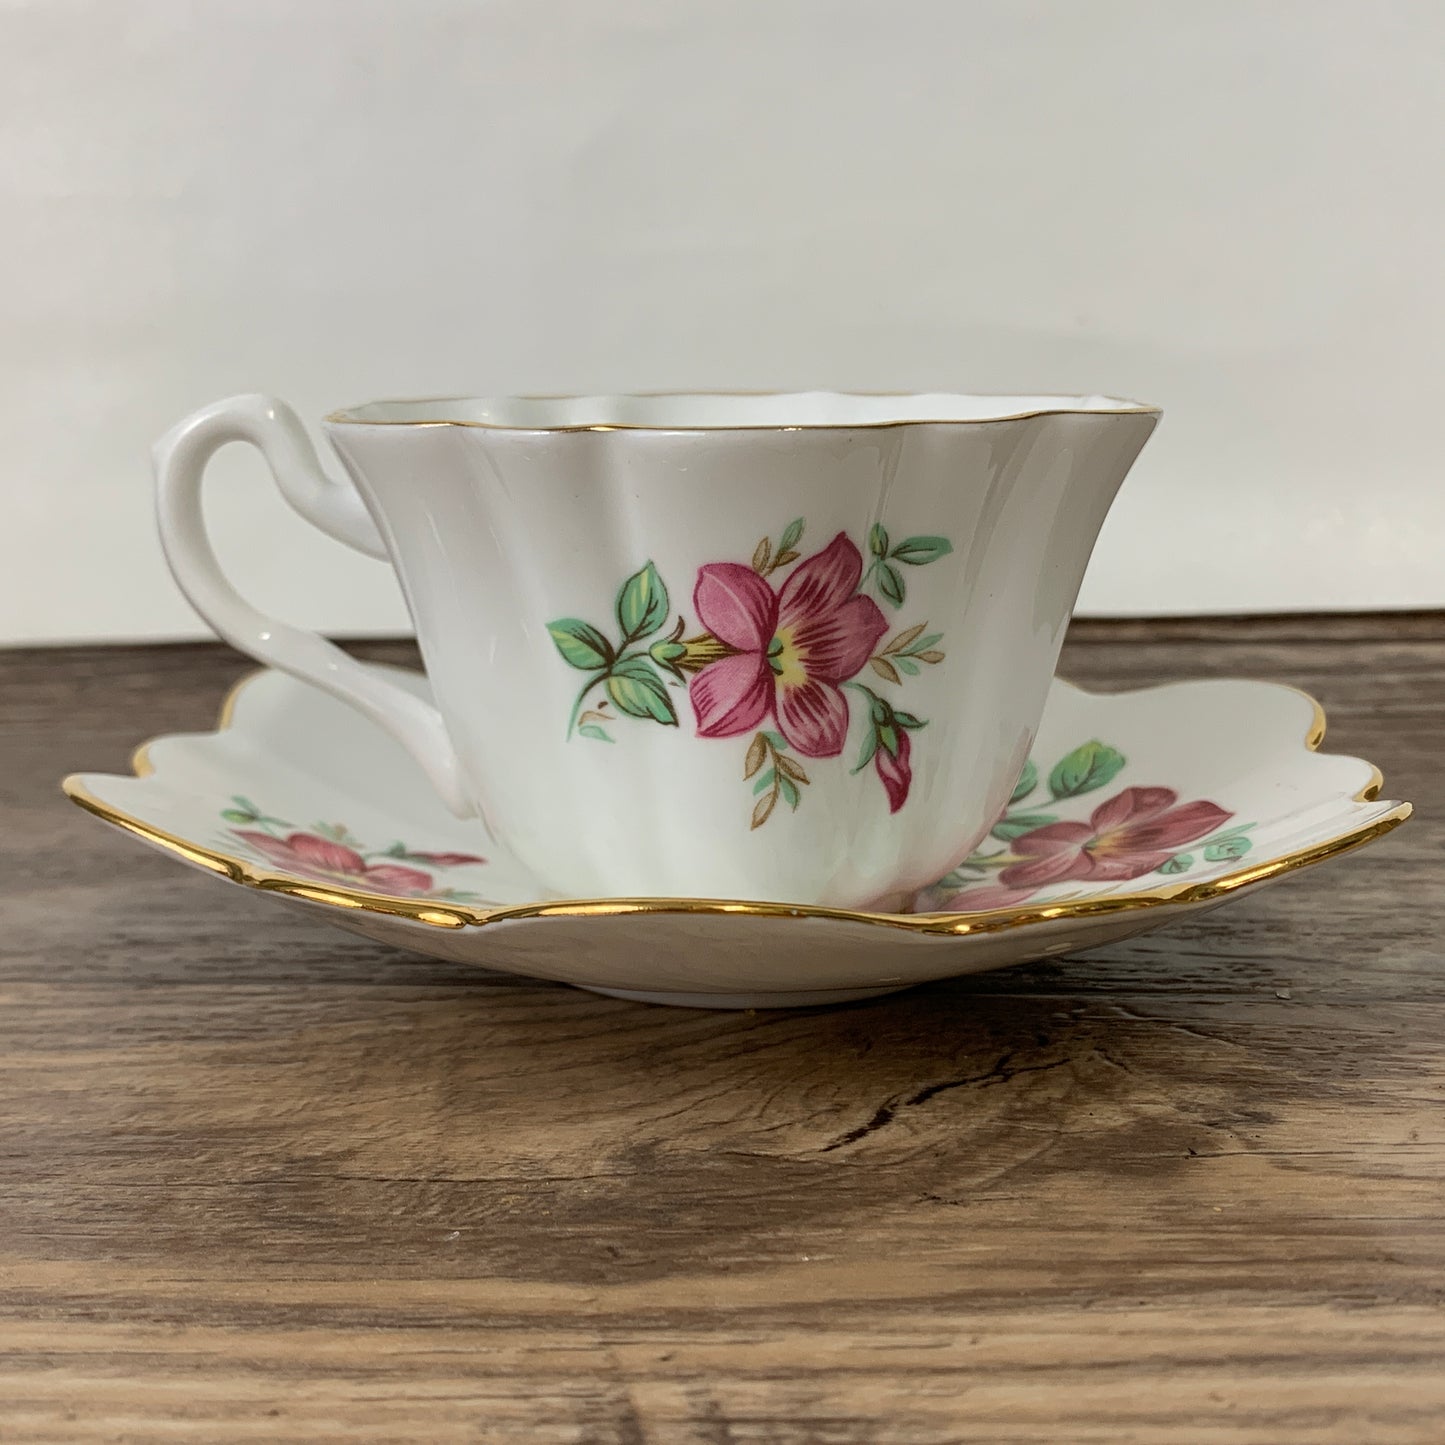 Vintage China Teacup with Pink Floral Pattern